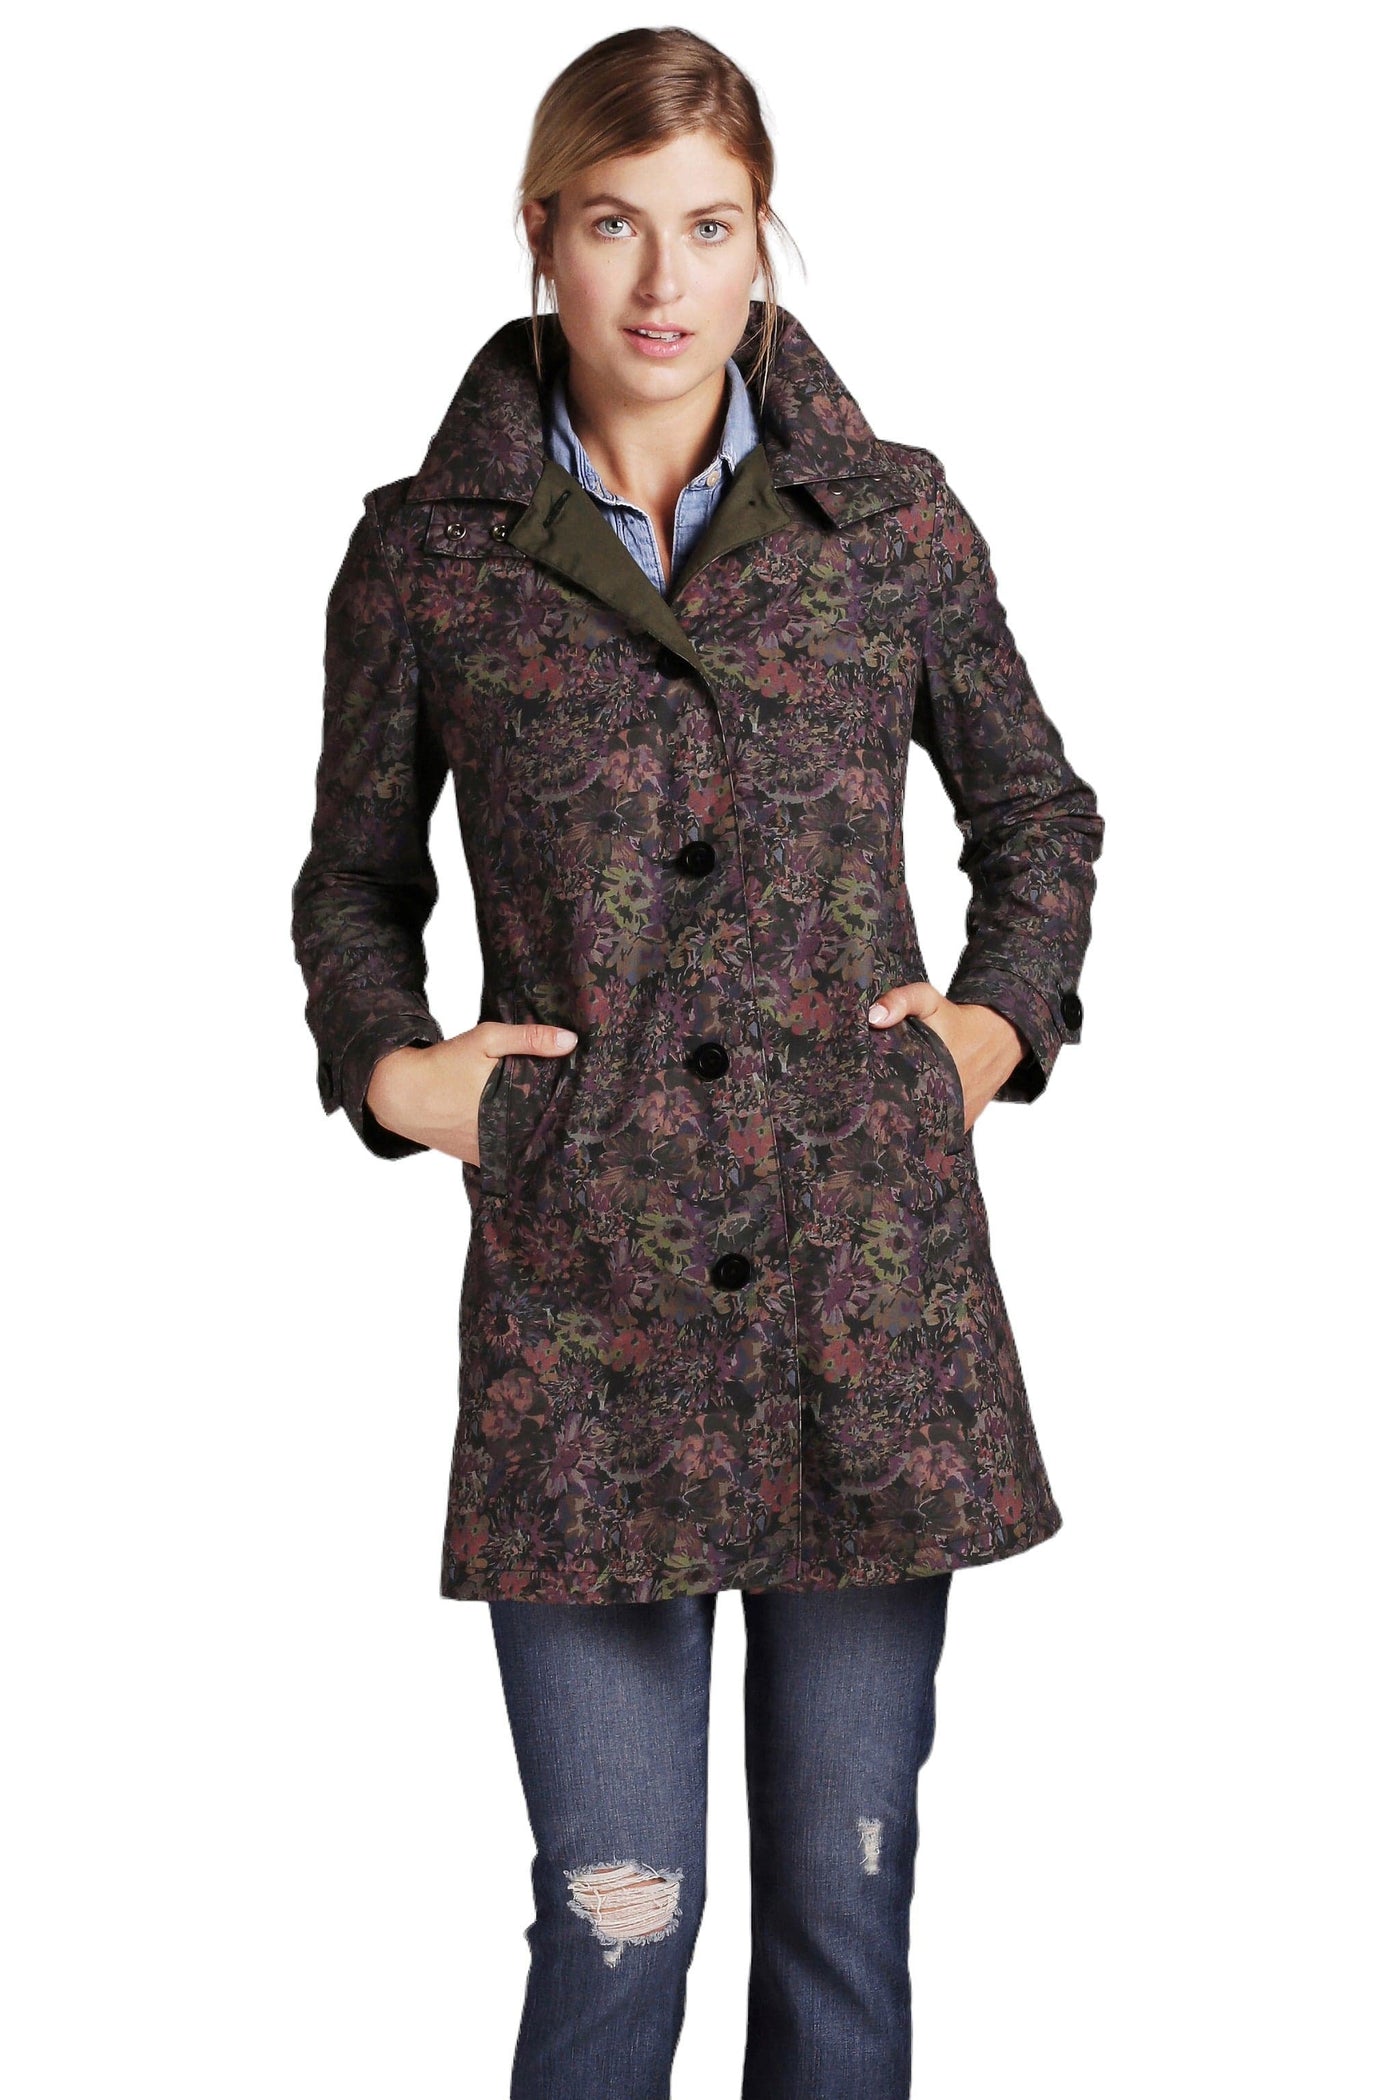 FELLER Outerwear Painted Floral / XS Queen Anne Trench